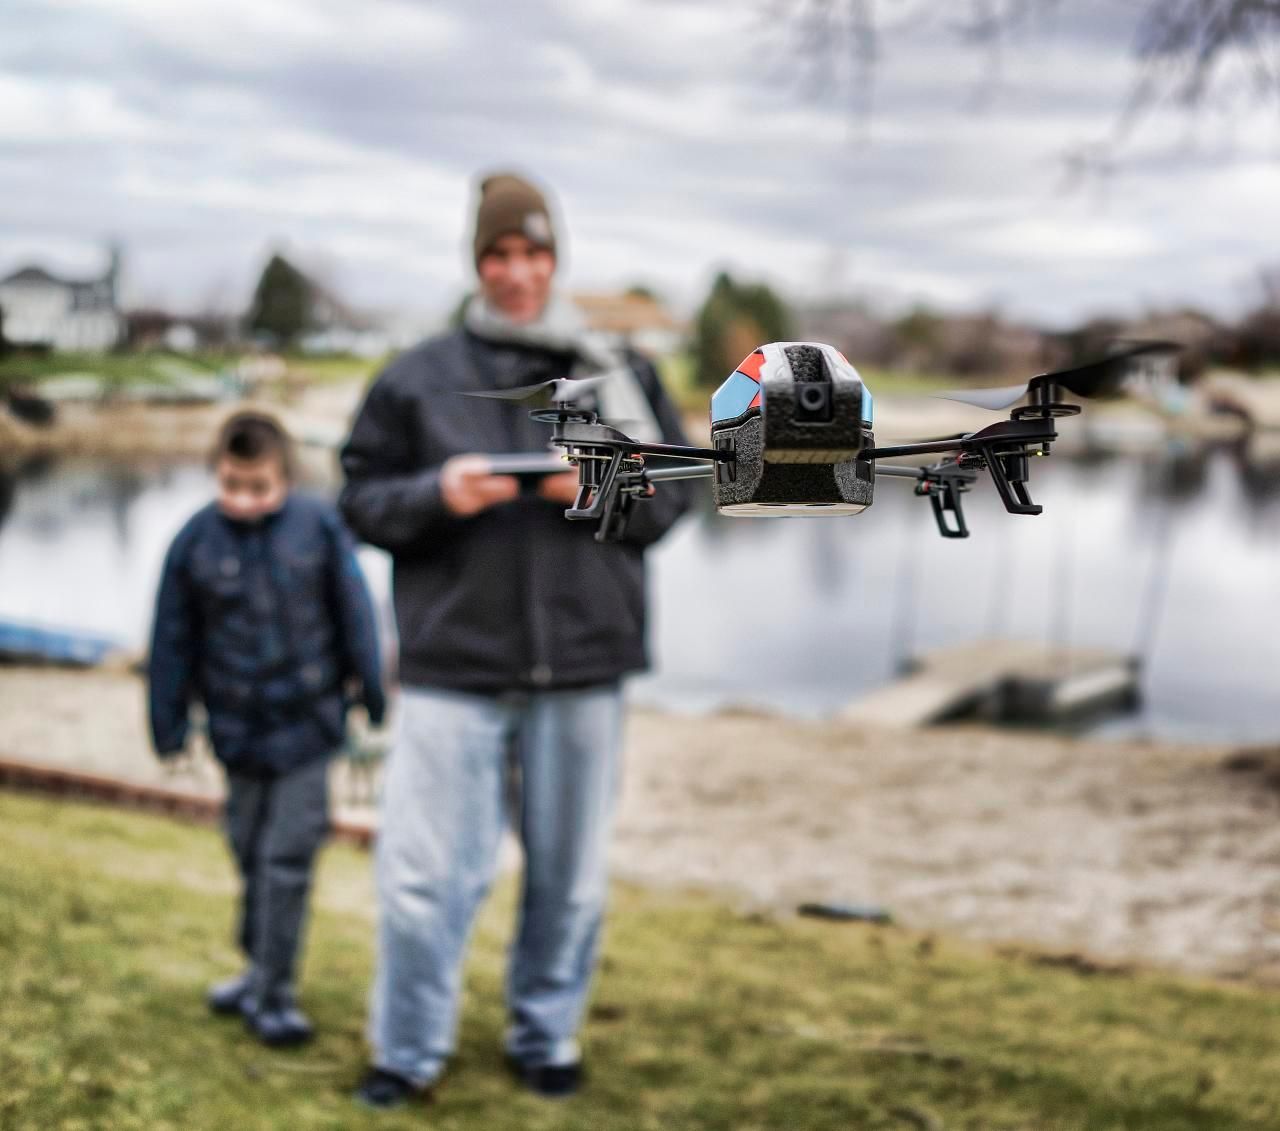 Should Localities Decide on Drone Policy? Not Everyone Thinks So